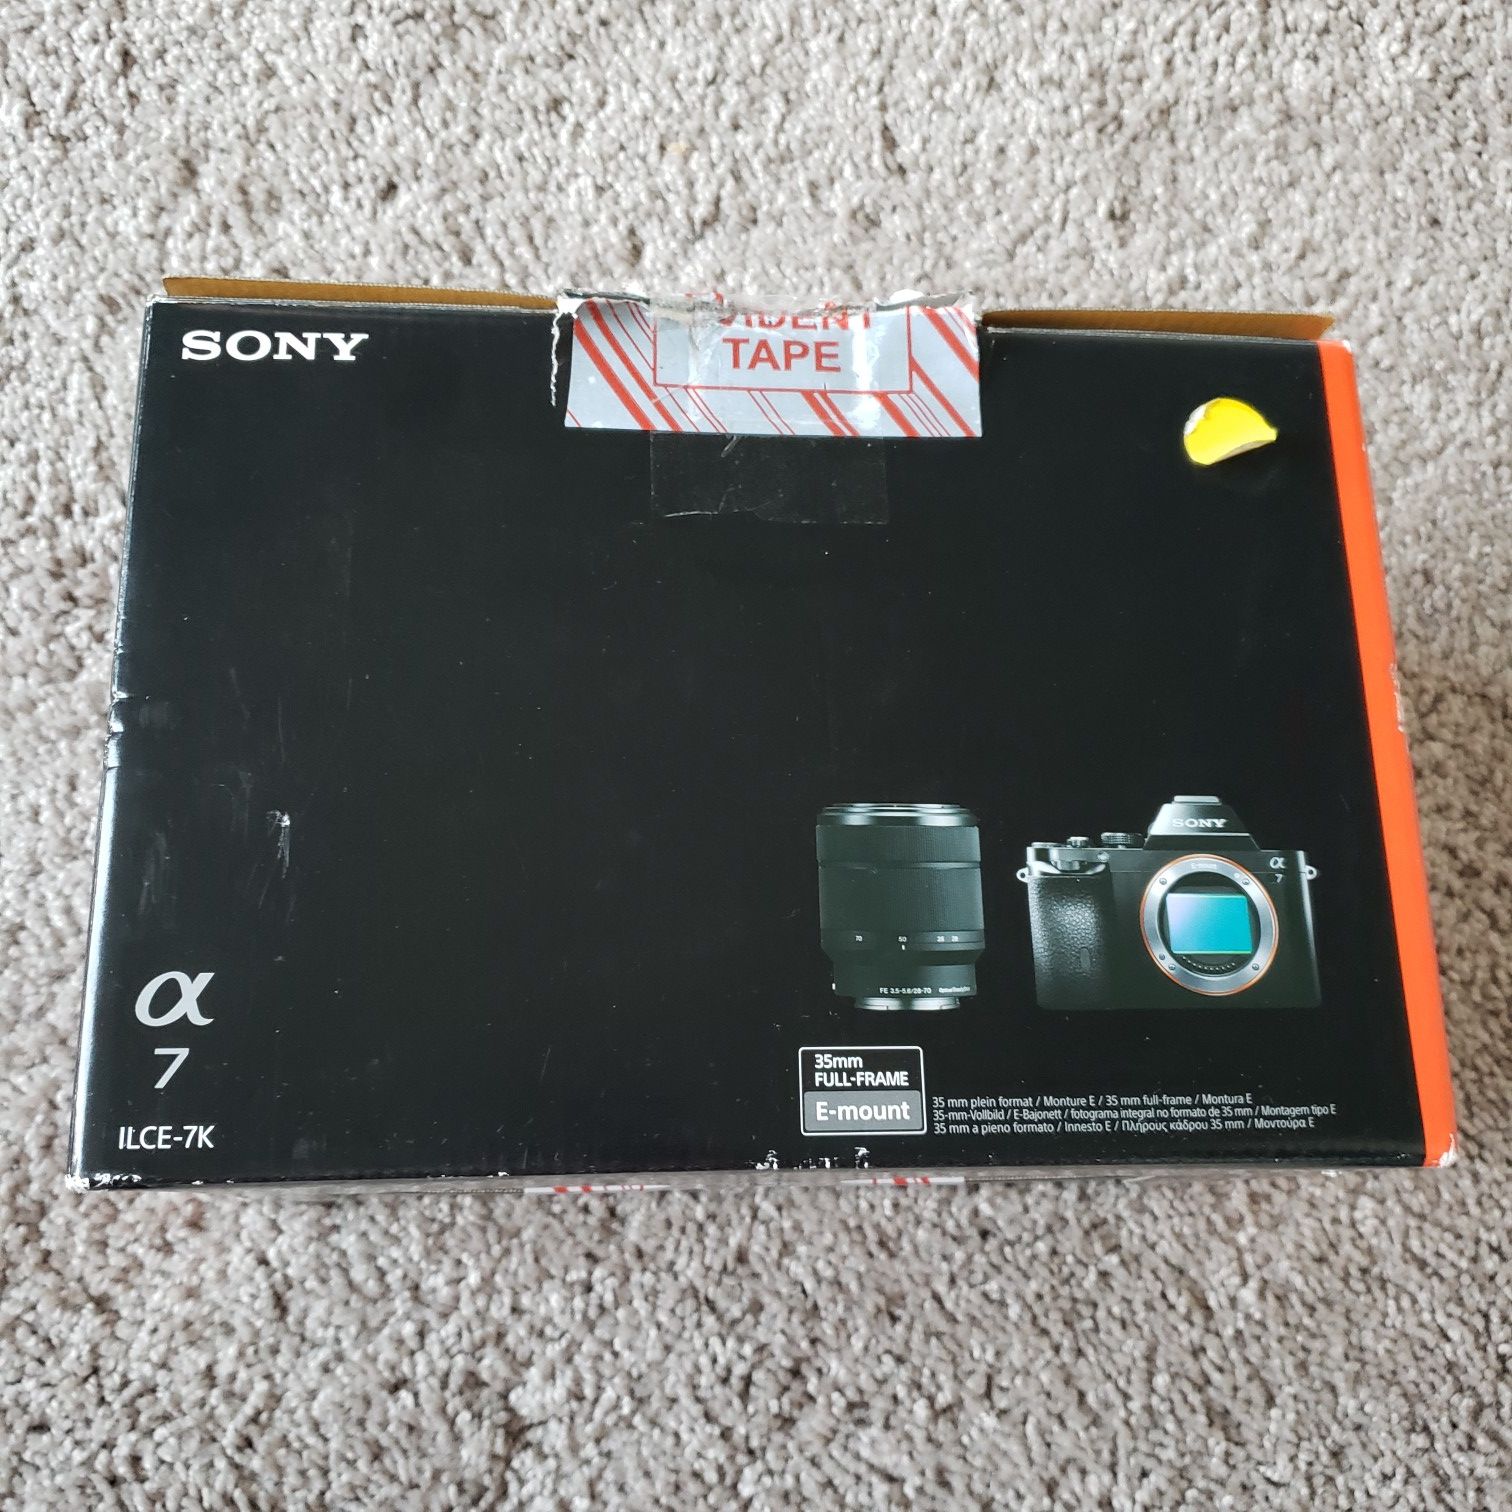 Sony A7 full frame camera with 28-70 lens (brand new)